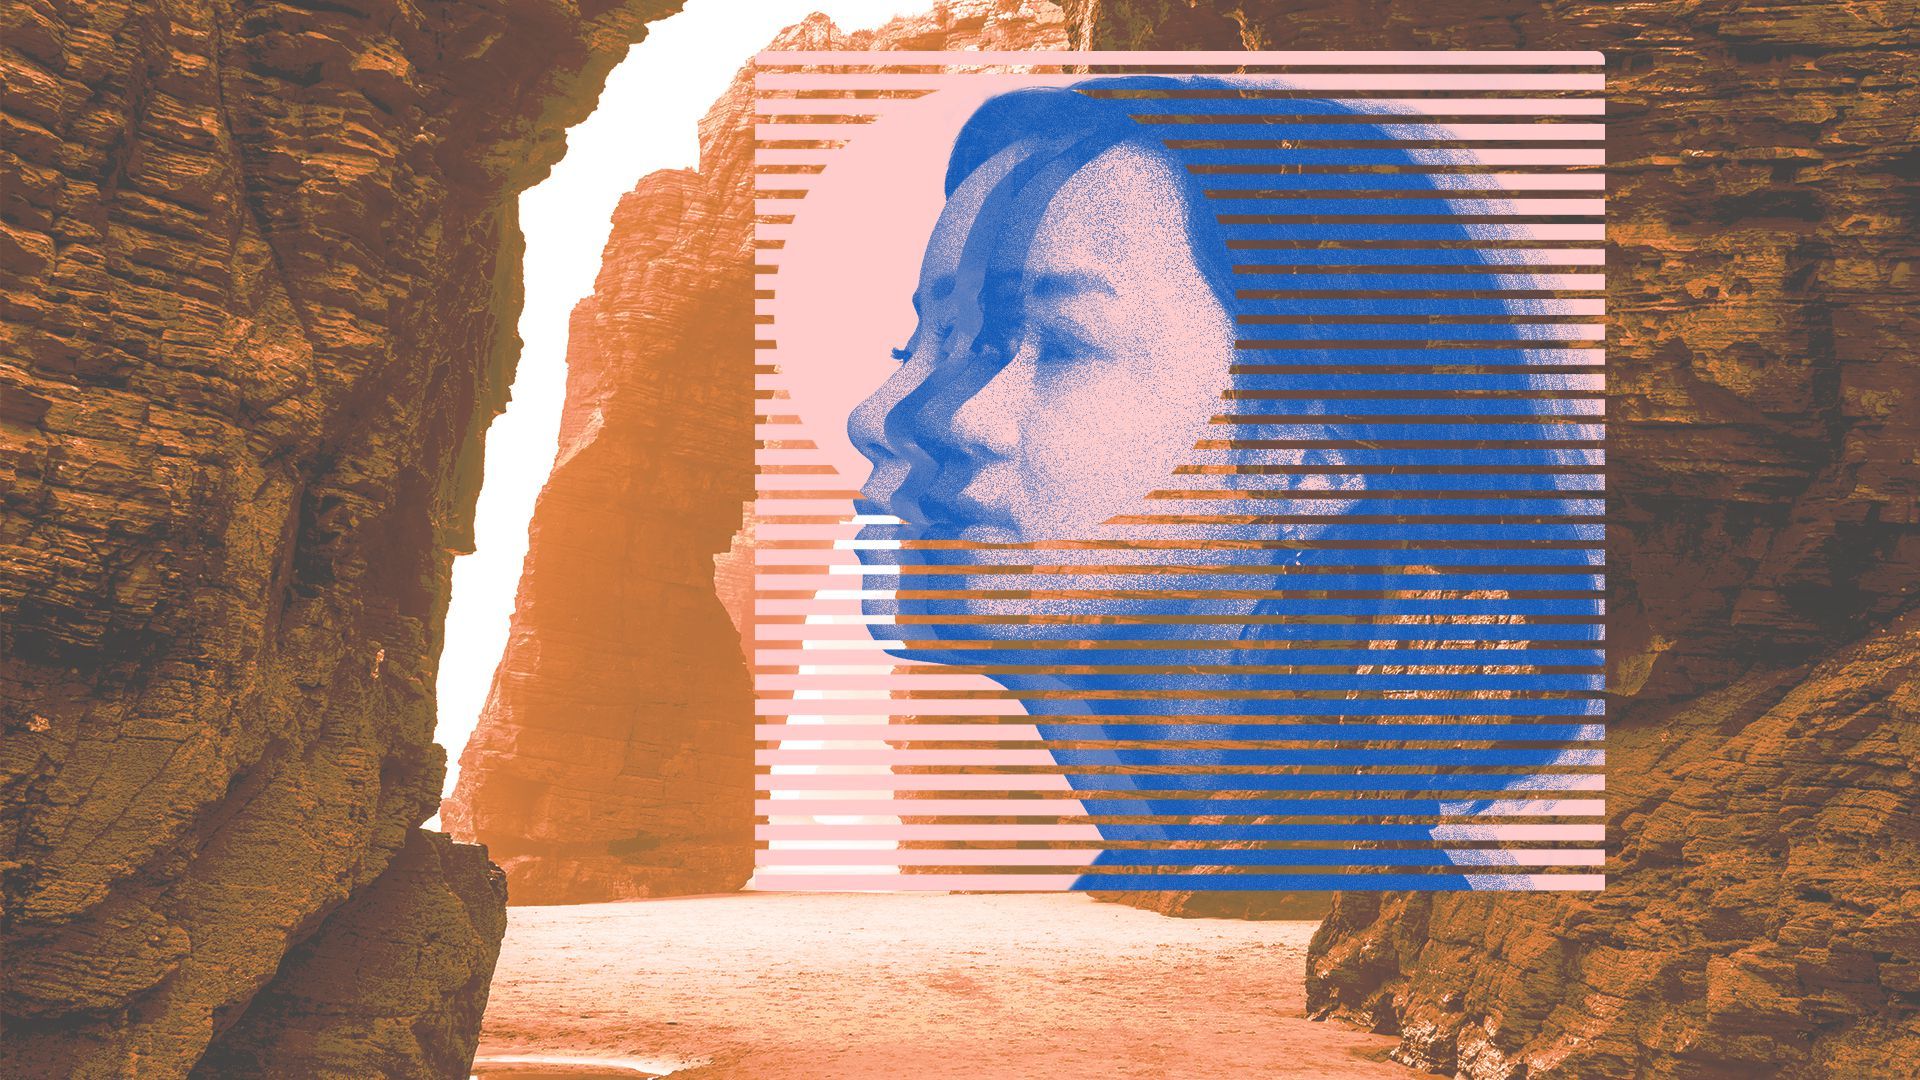 Illustration of an overlapping layer of photos of a woman with rocky cliffs in the background.